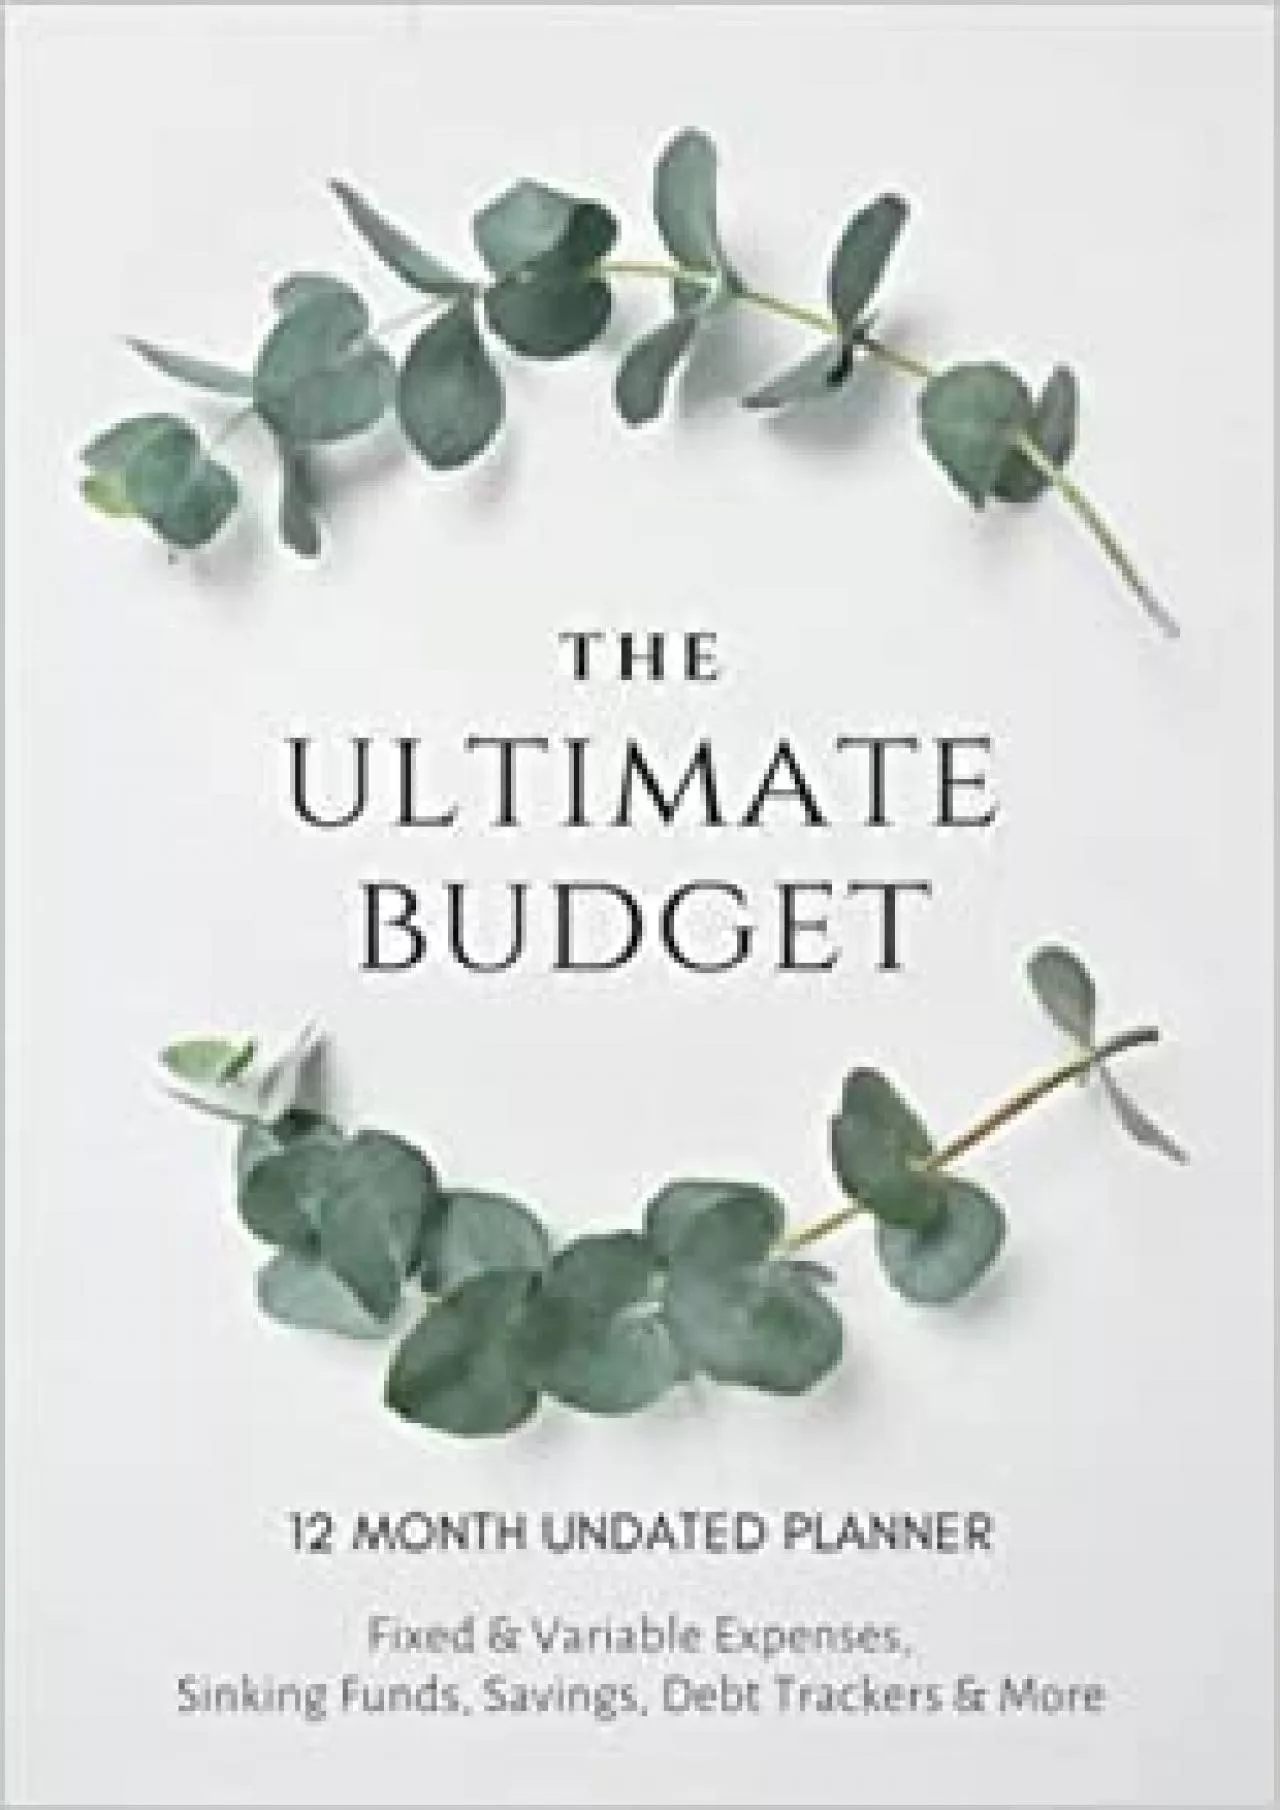 The Ultimate Budget - 12 Month Undated Planner: Fixed & Variable Expenses Sinking Funds